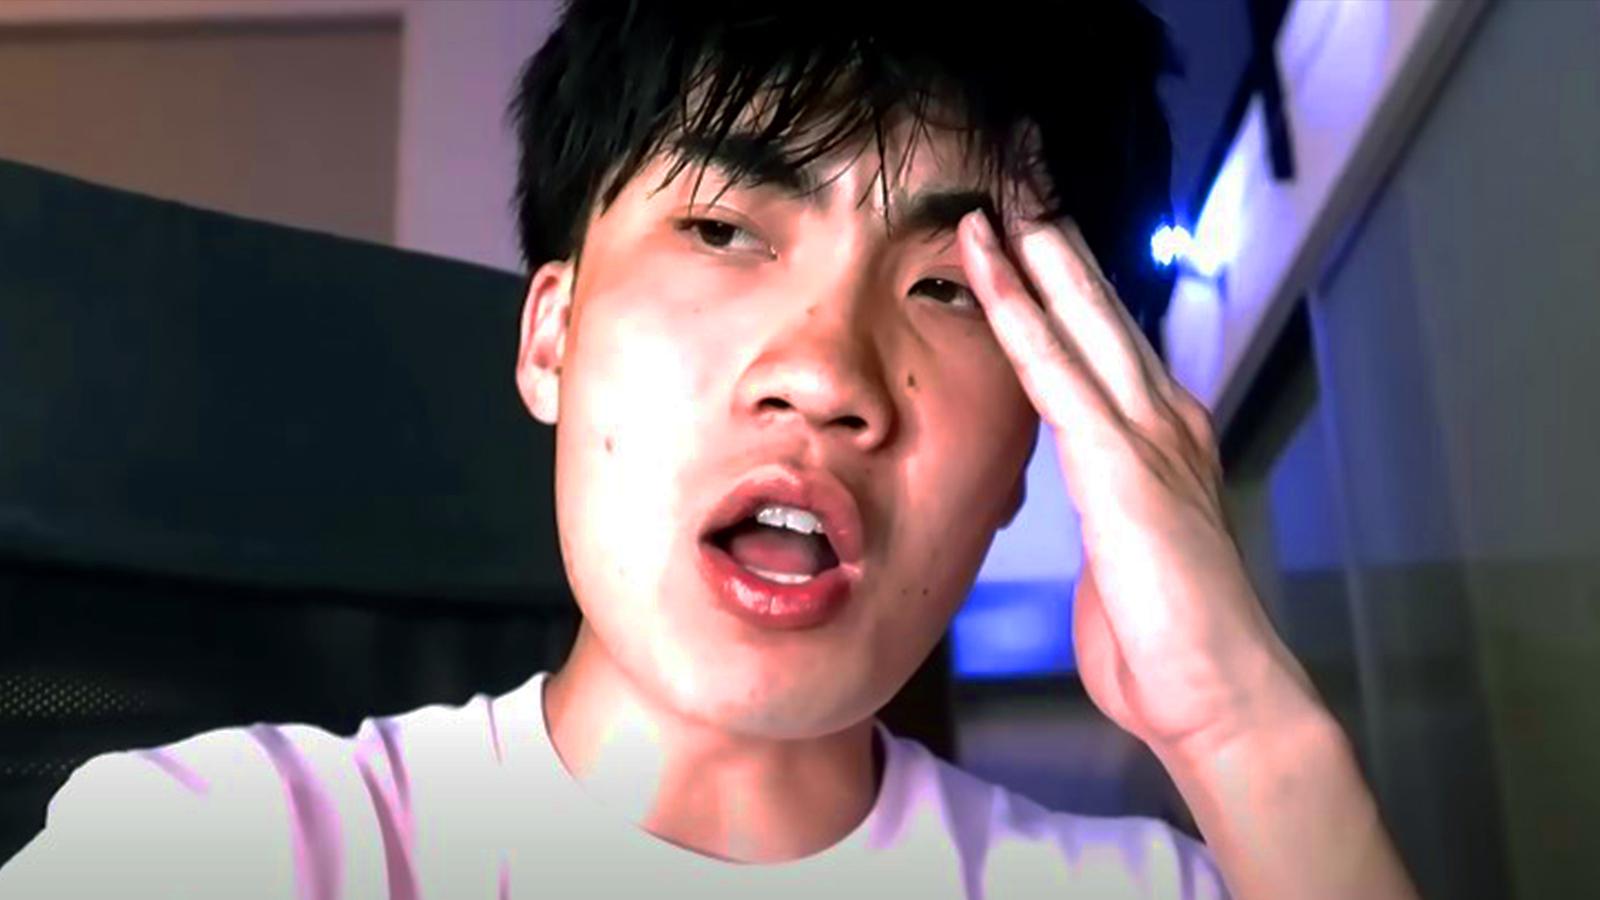 ricegum-quits-streaming-year-after-rumble-deal